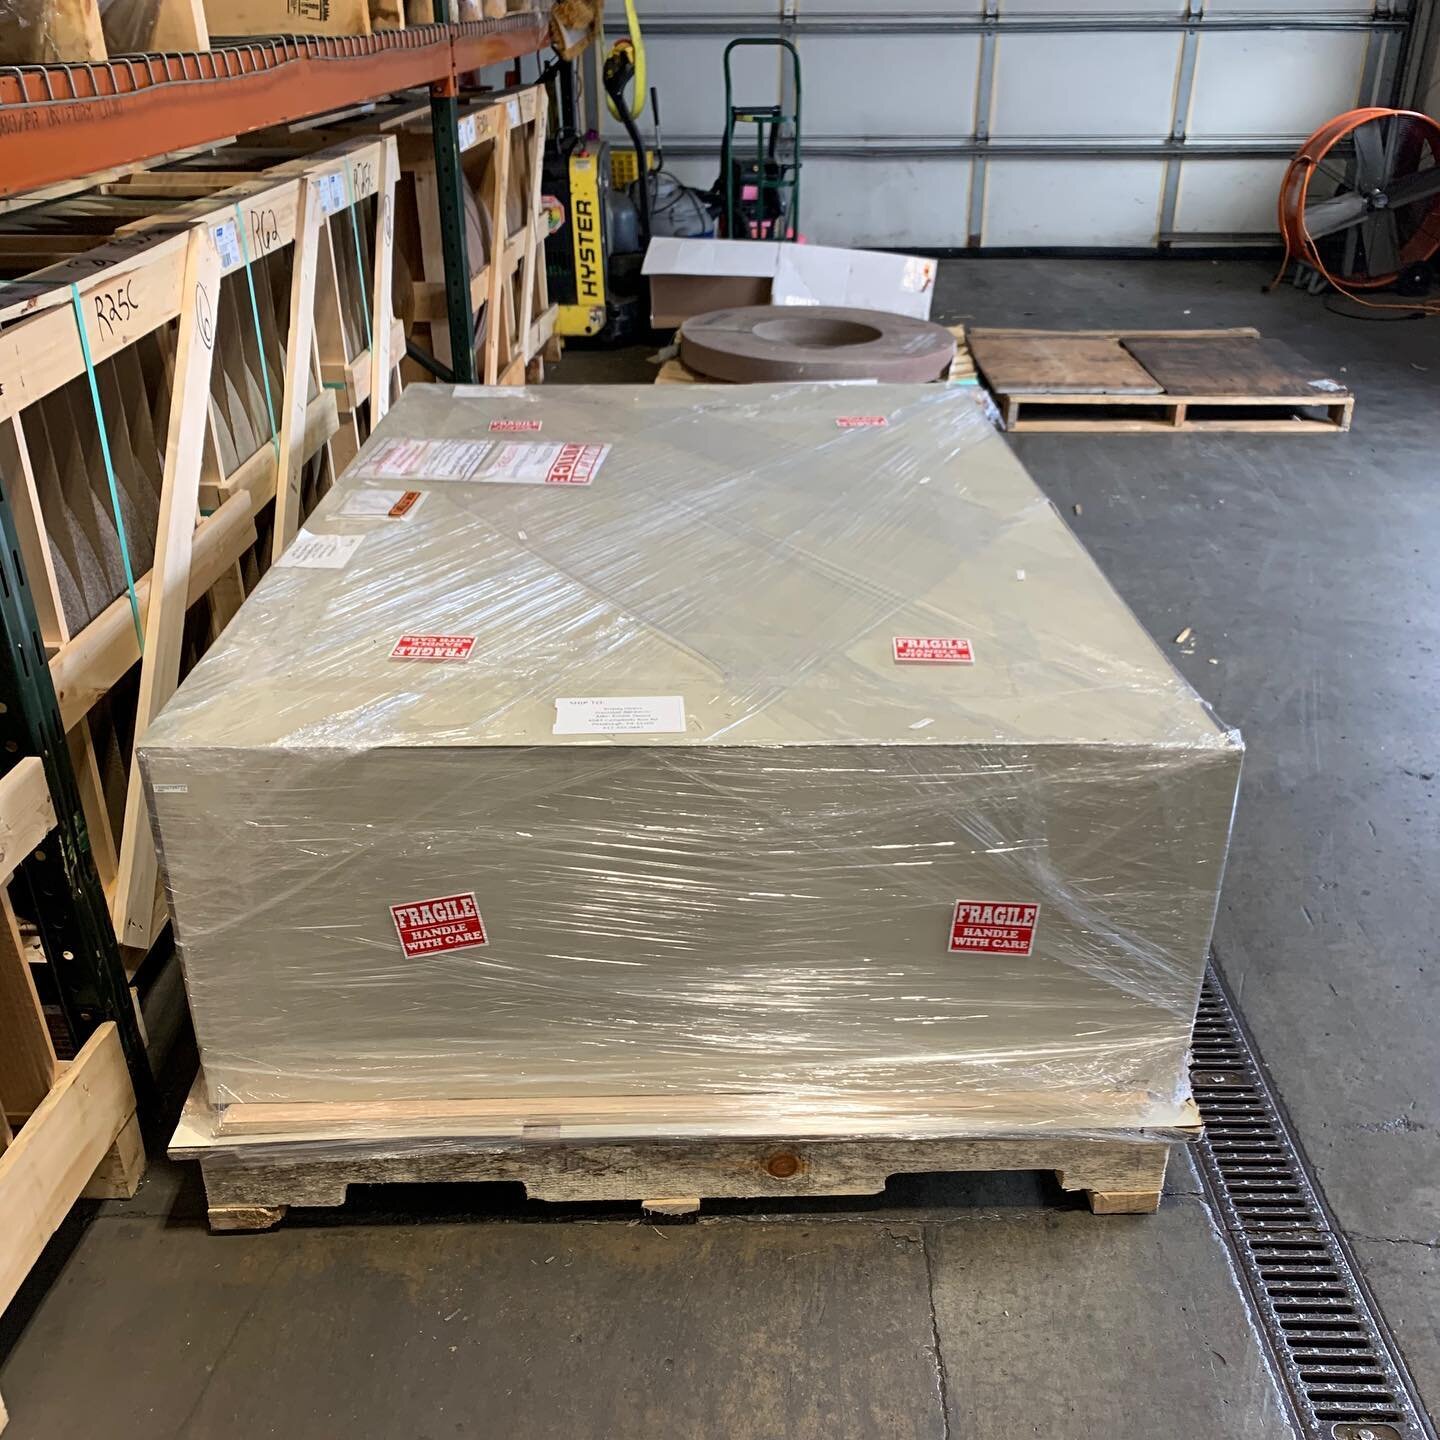 Excited to receive my shipment of large custom-sized boards from Ampersand! Phase two of paintings for my solo exhibit &ldquo;Hot Metal&rdquo; can now begin! ... And it sure comes in handy having a warehouse in the family. 
#ampersand #ampersandpaste